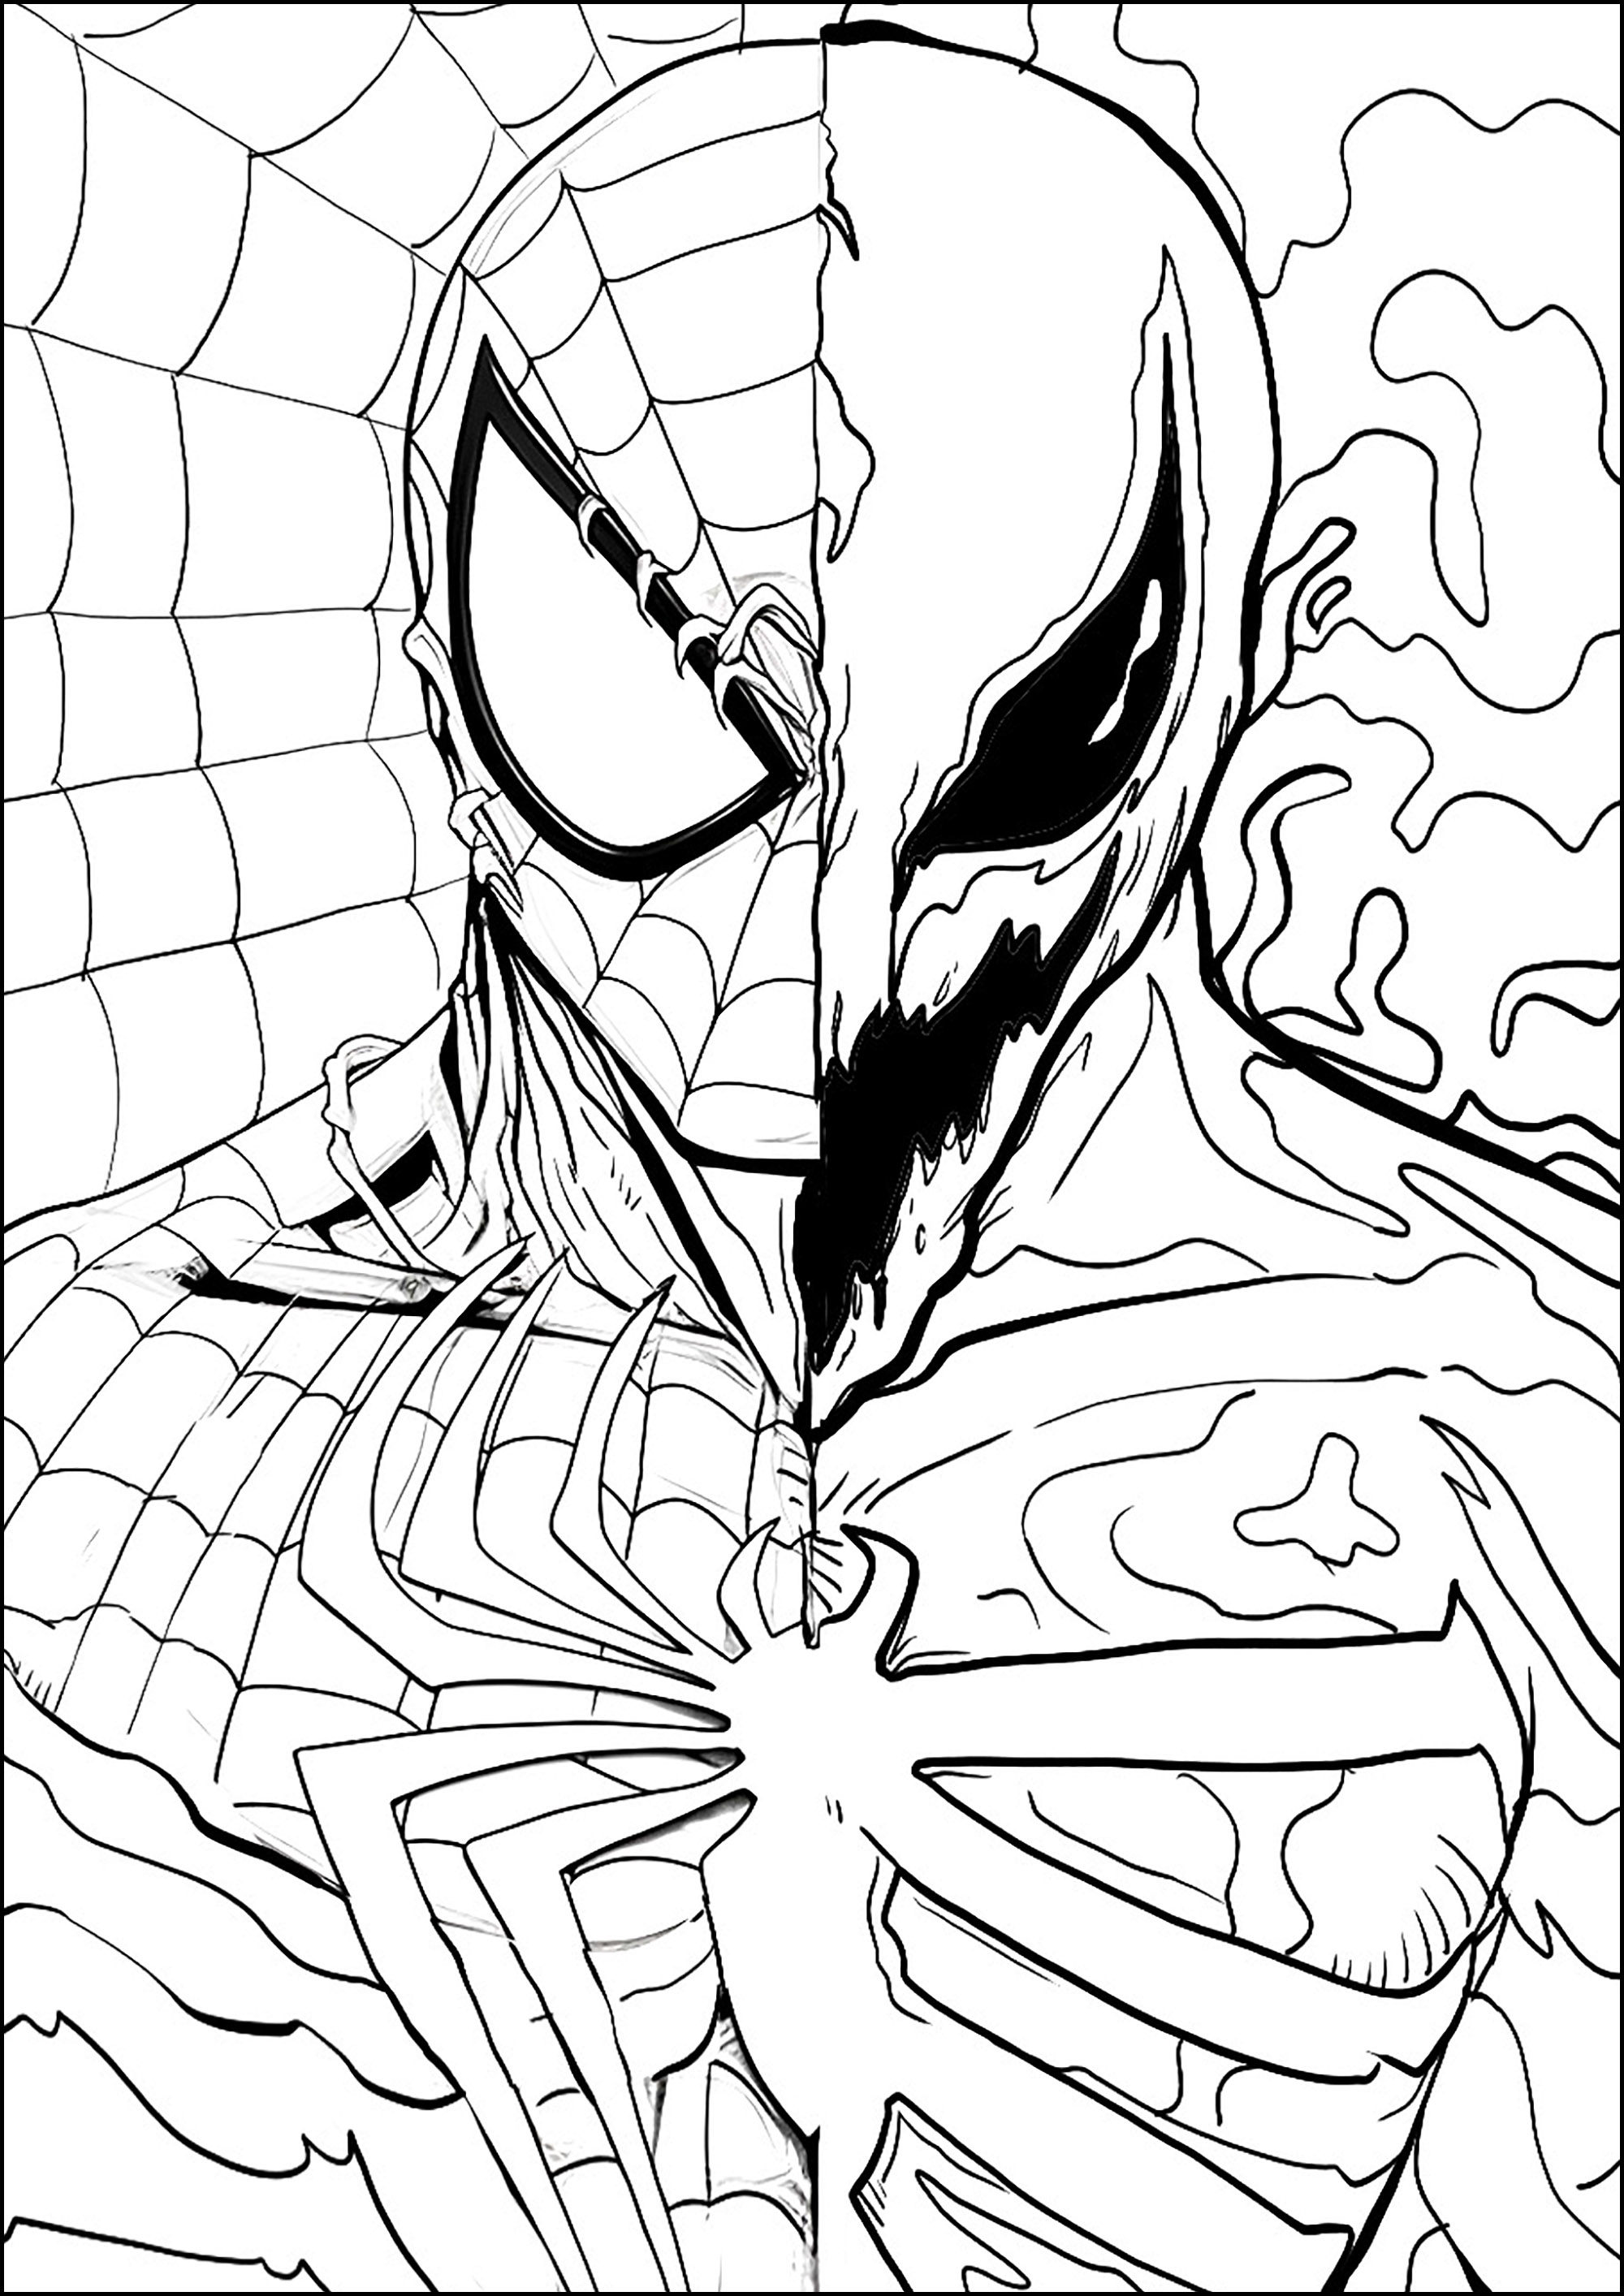 Spider-Man and Venom mixed drawing